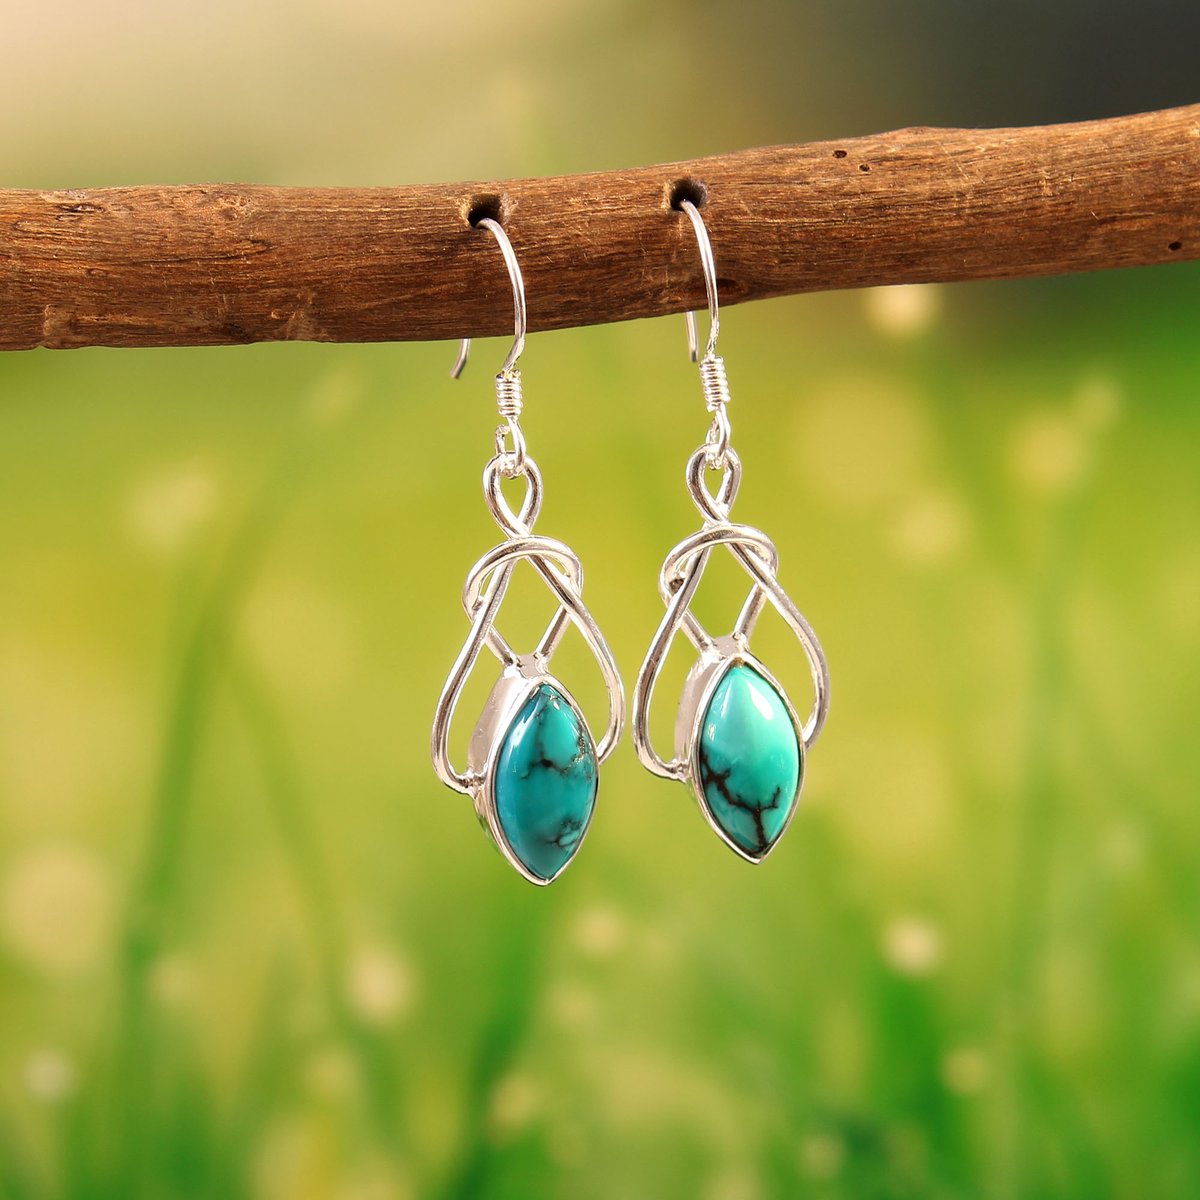 Turquoise Earring.... 
.
.
.
.
 #turquoiseearrings  #handcraftedwithlove ##turquoisejewelry #aquamarinering #TurquoiseRings #turquoiseearrings #turquoisebracelet #enamelearrings #sterlingsilverring #sterlingsilverjewellery #silver925 #ladysmith #madewithlove #silverandturquoise